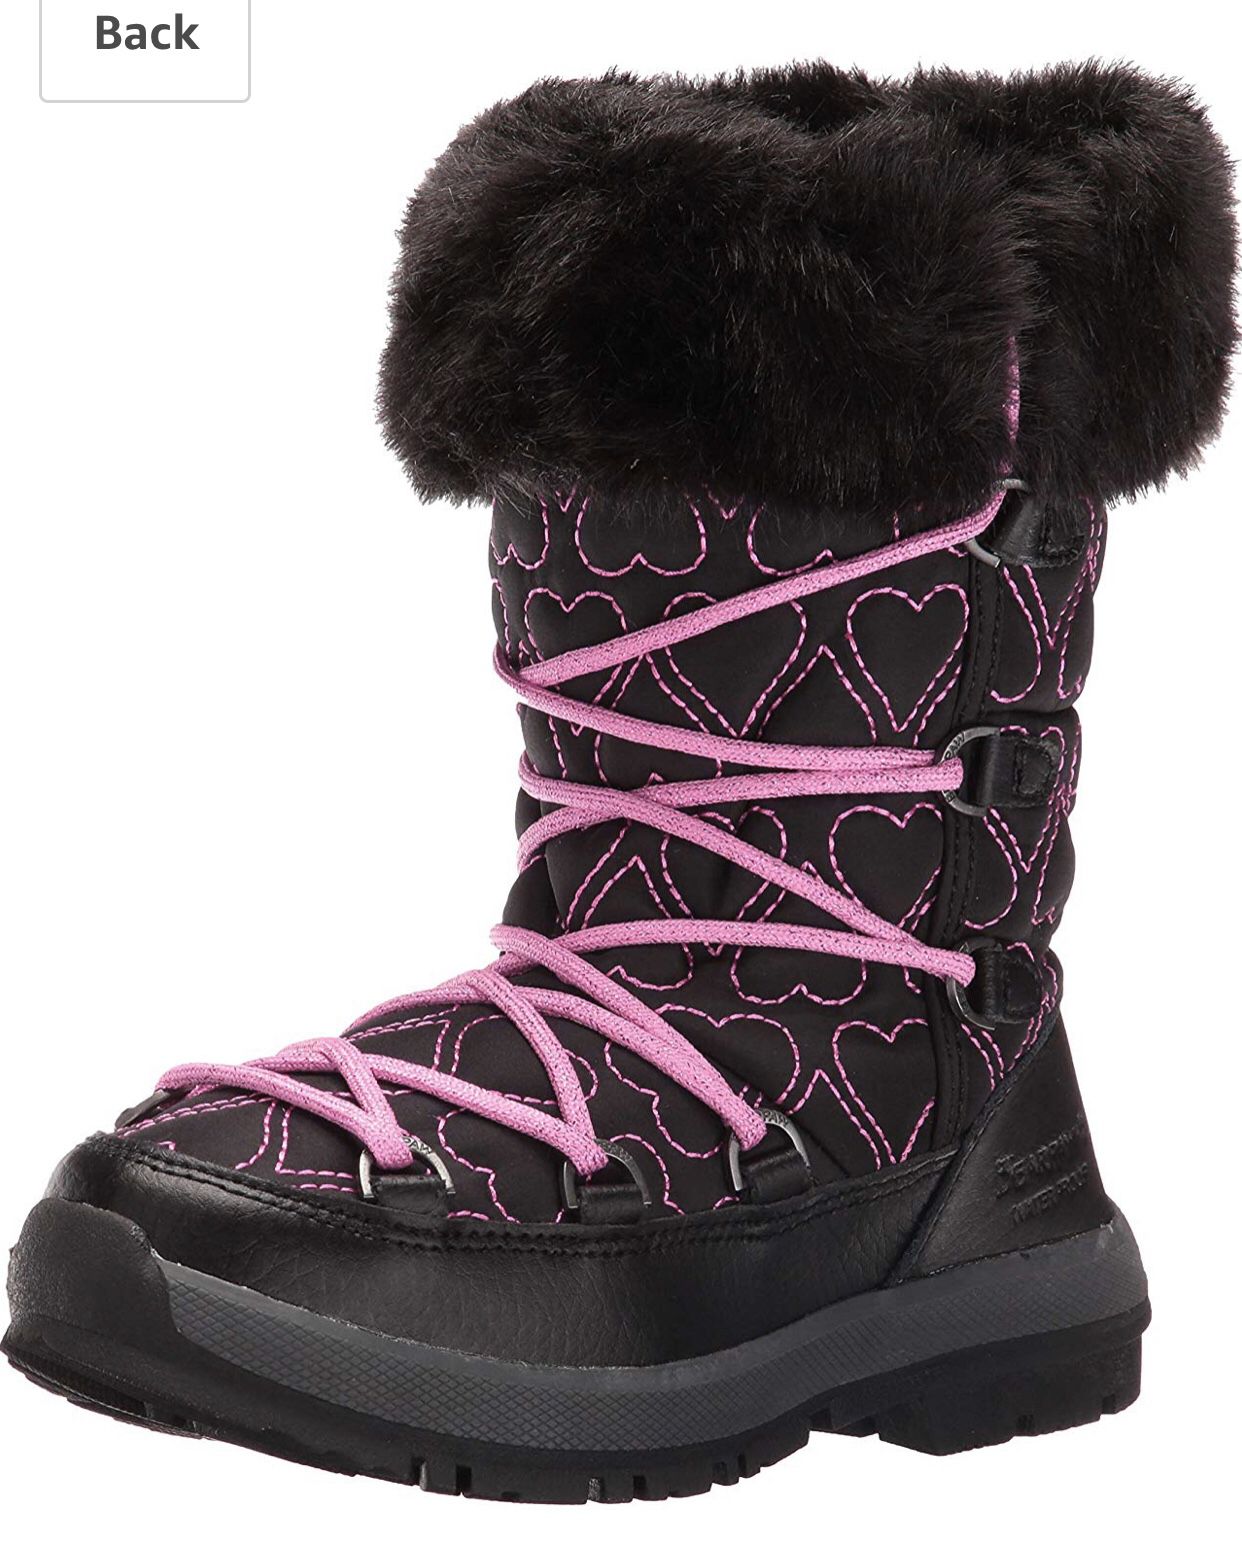 Snow boots size #2 bear 🐻 paw girl